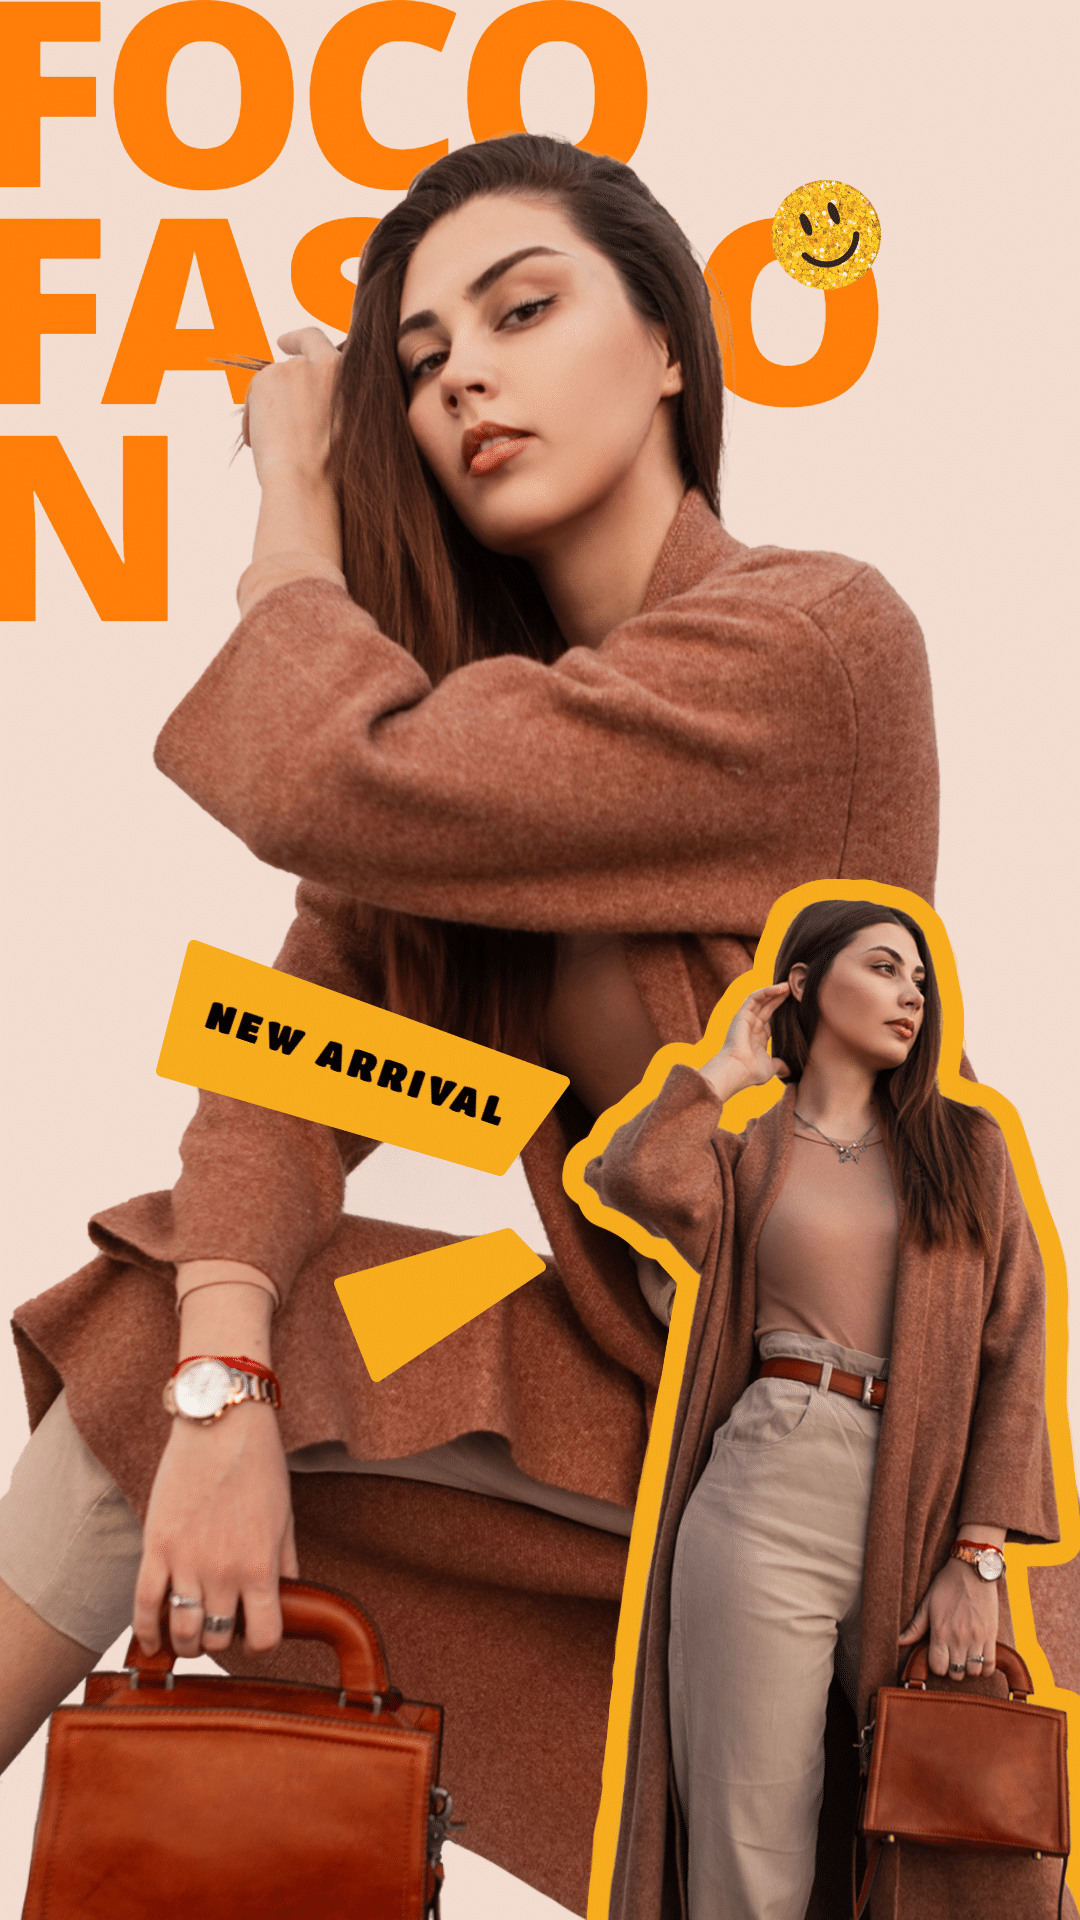 Brown Coat Fashionable Women's Wear New Arrival Promotion Ecommerce Story预览效果